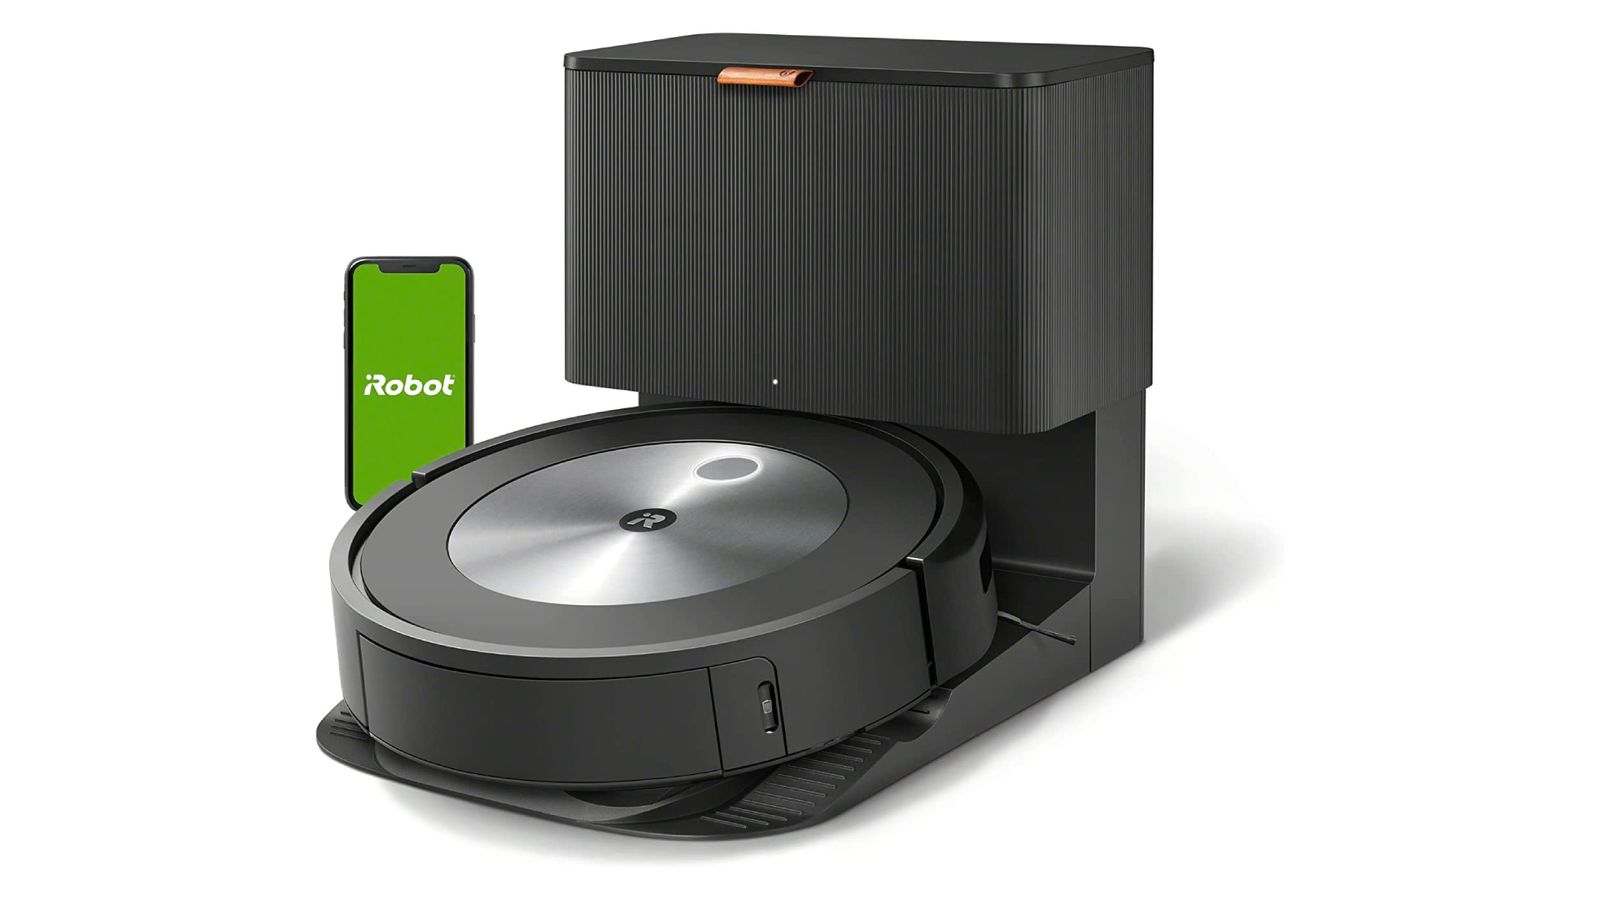 Best tech gift ideas - iRobot product image of a black and grey robot vacuum.